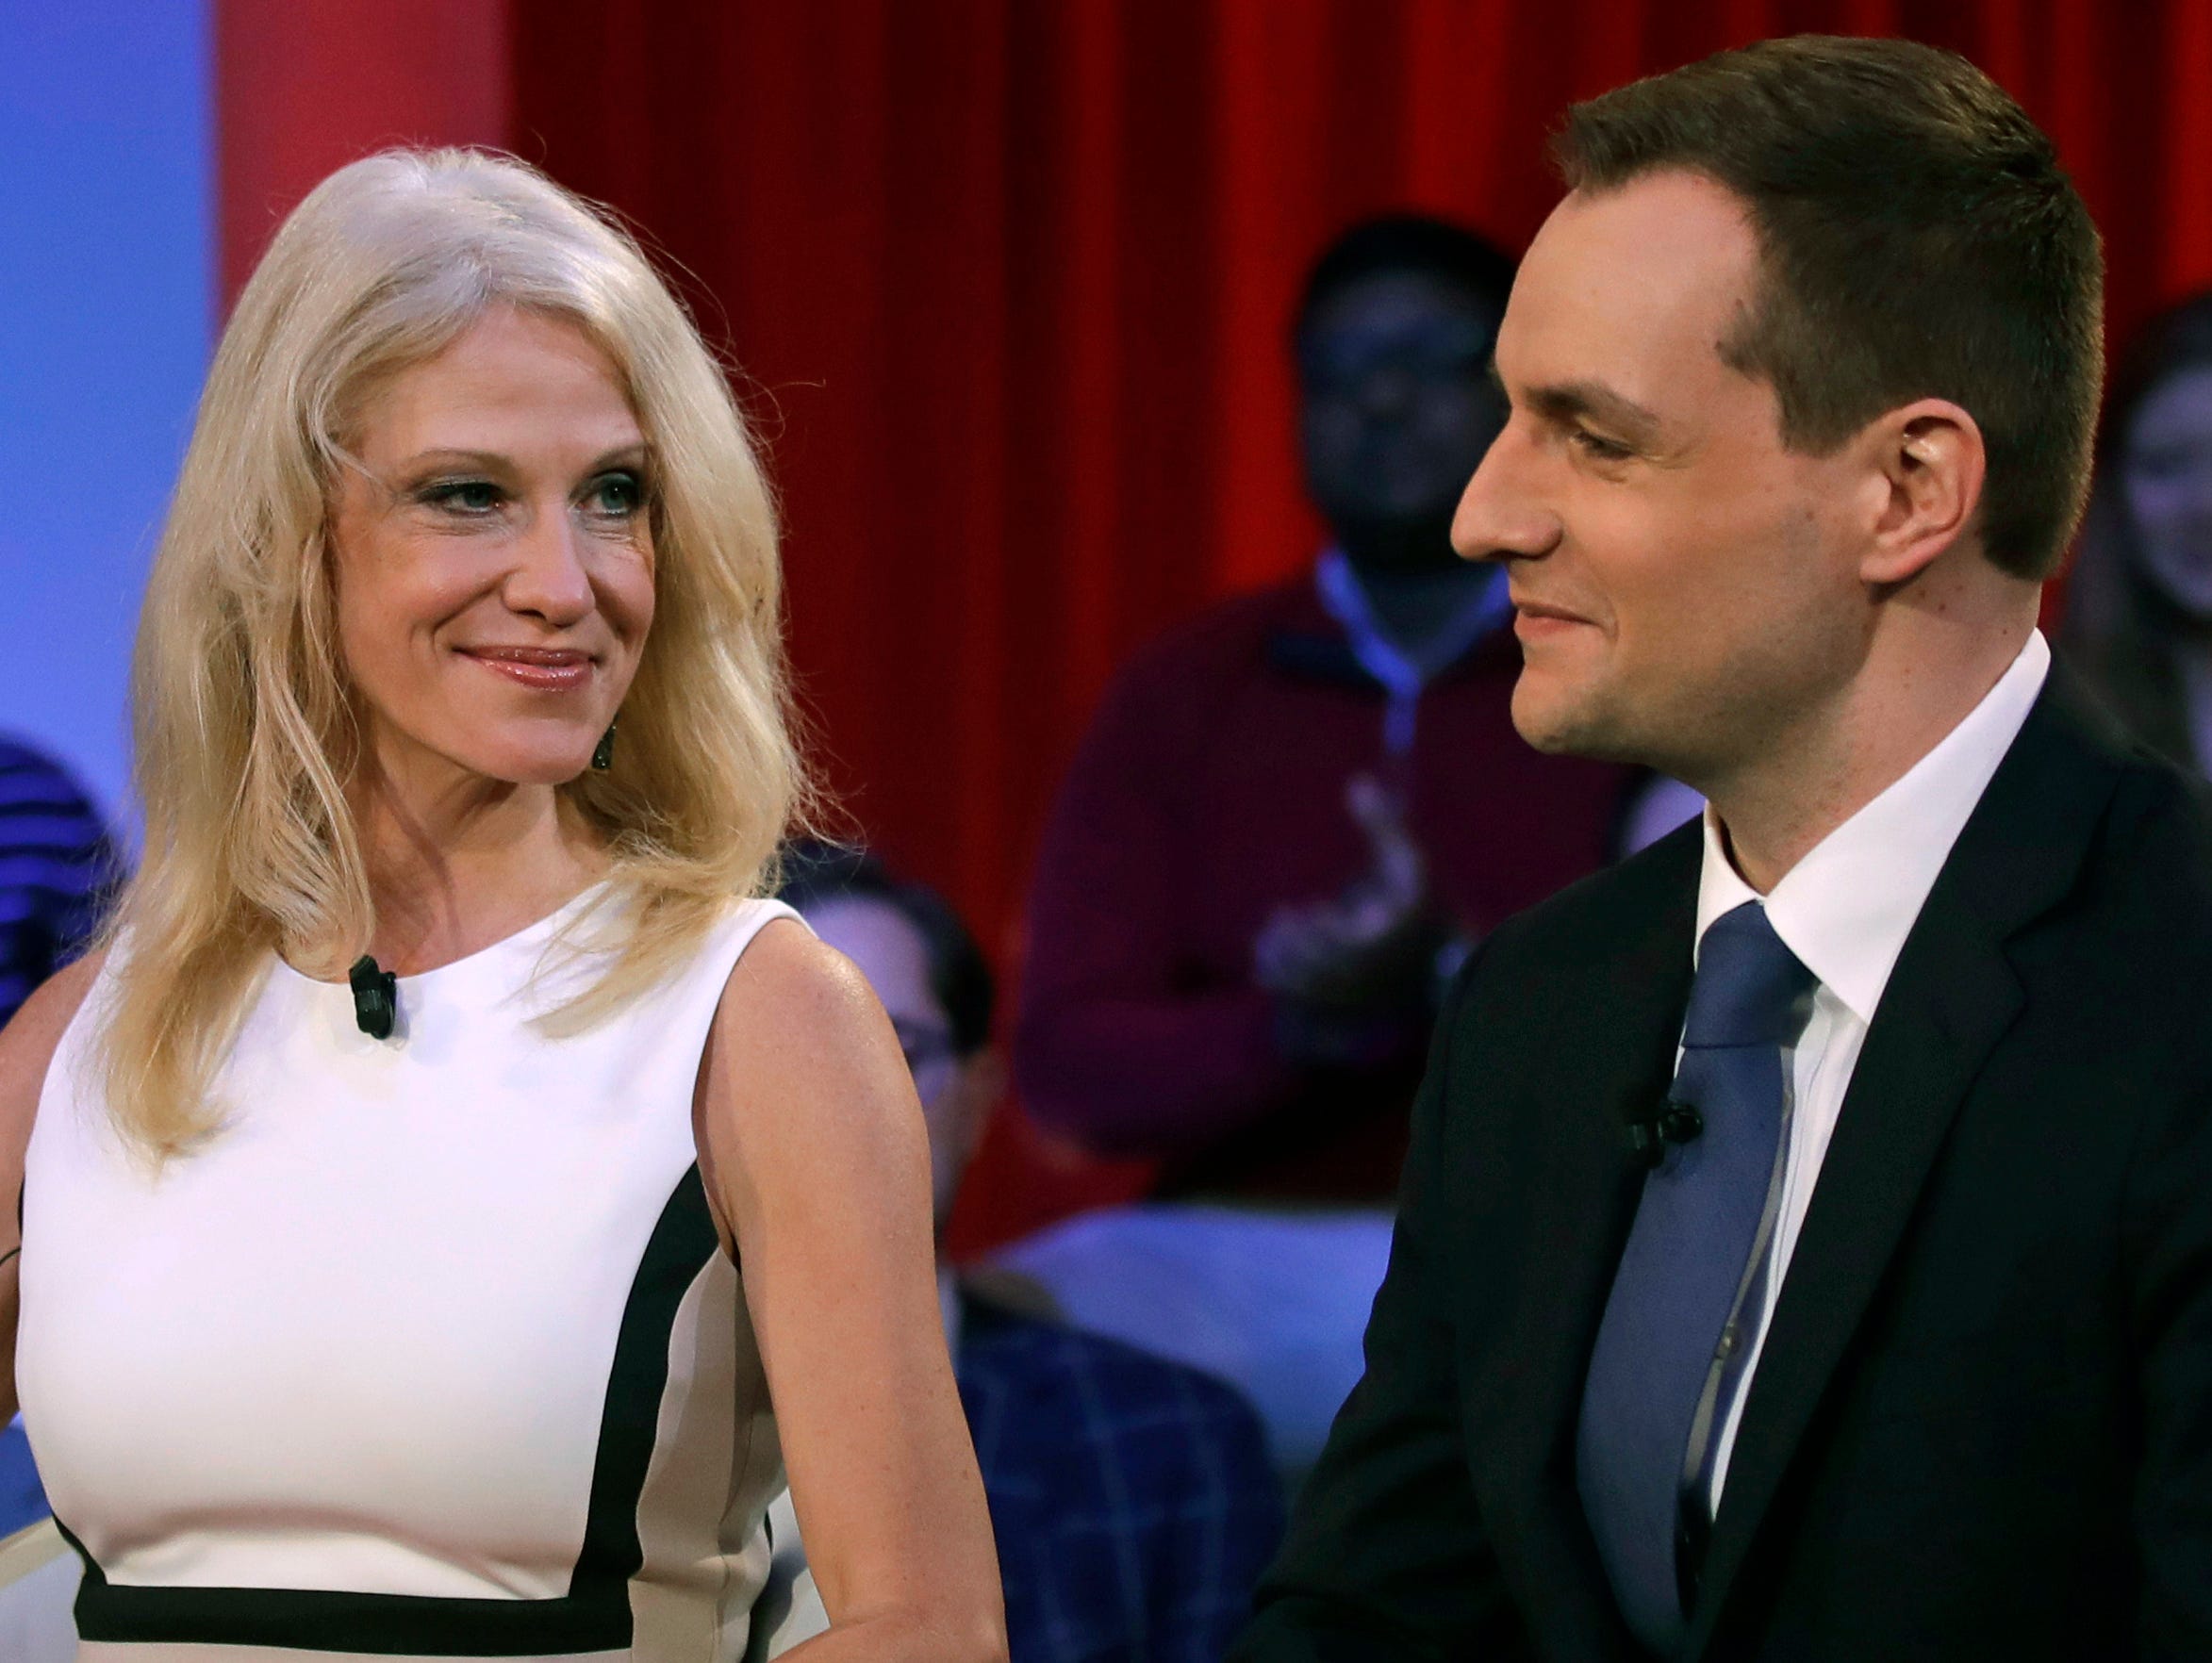 Kellyanne Conway, Trump-Pence campaign manager, left, looks towards Robby Mook, Clinton-Kaine campaign manager, prior to a forum at Harvard University's Kennedy School of Government in Cambridge, Mass., on Dec. 1, 2016.